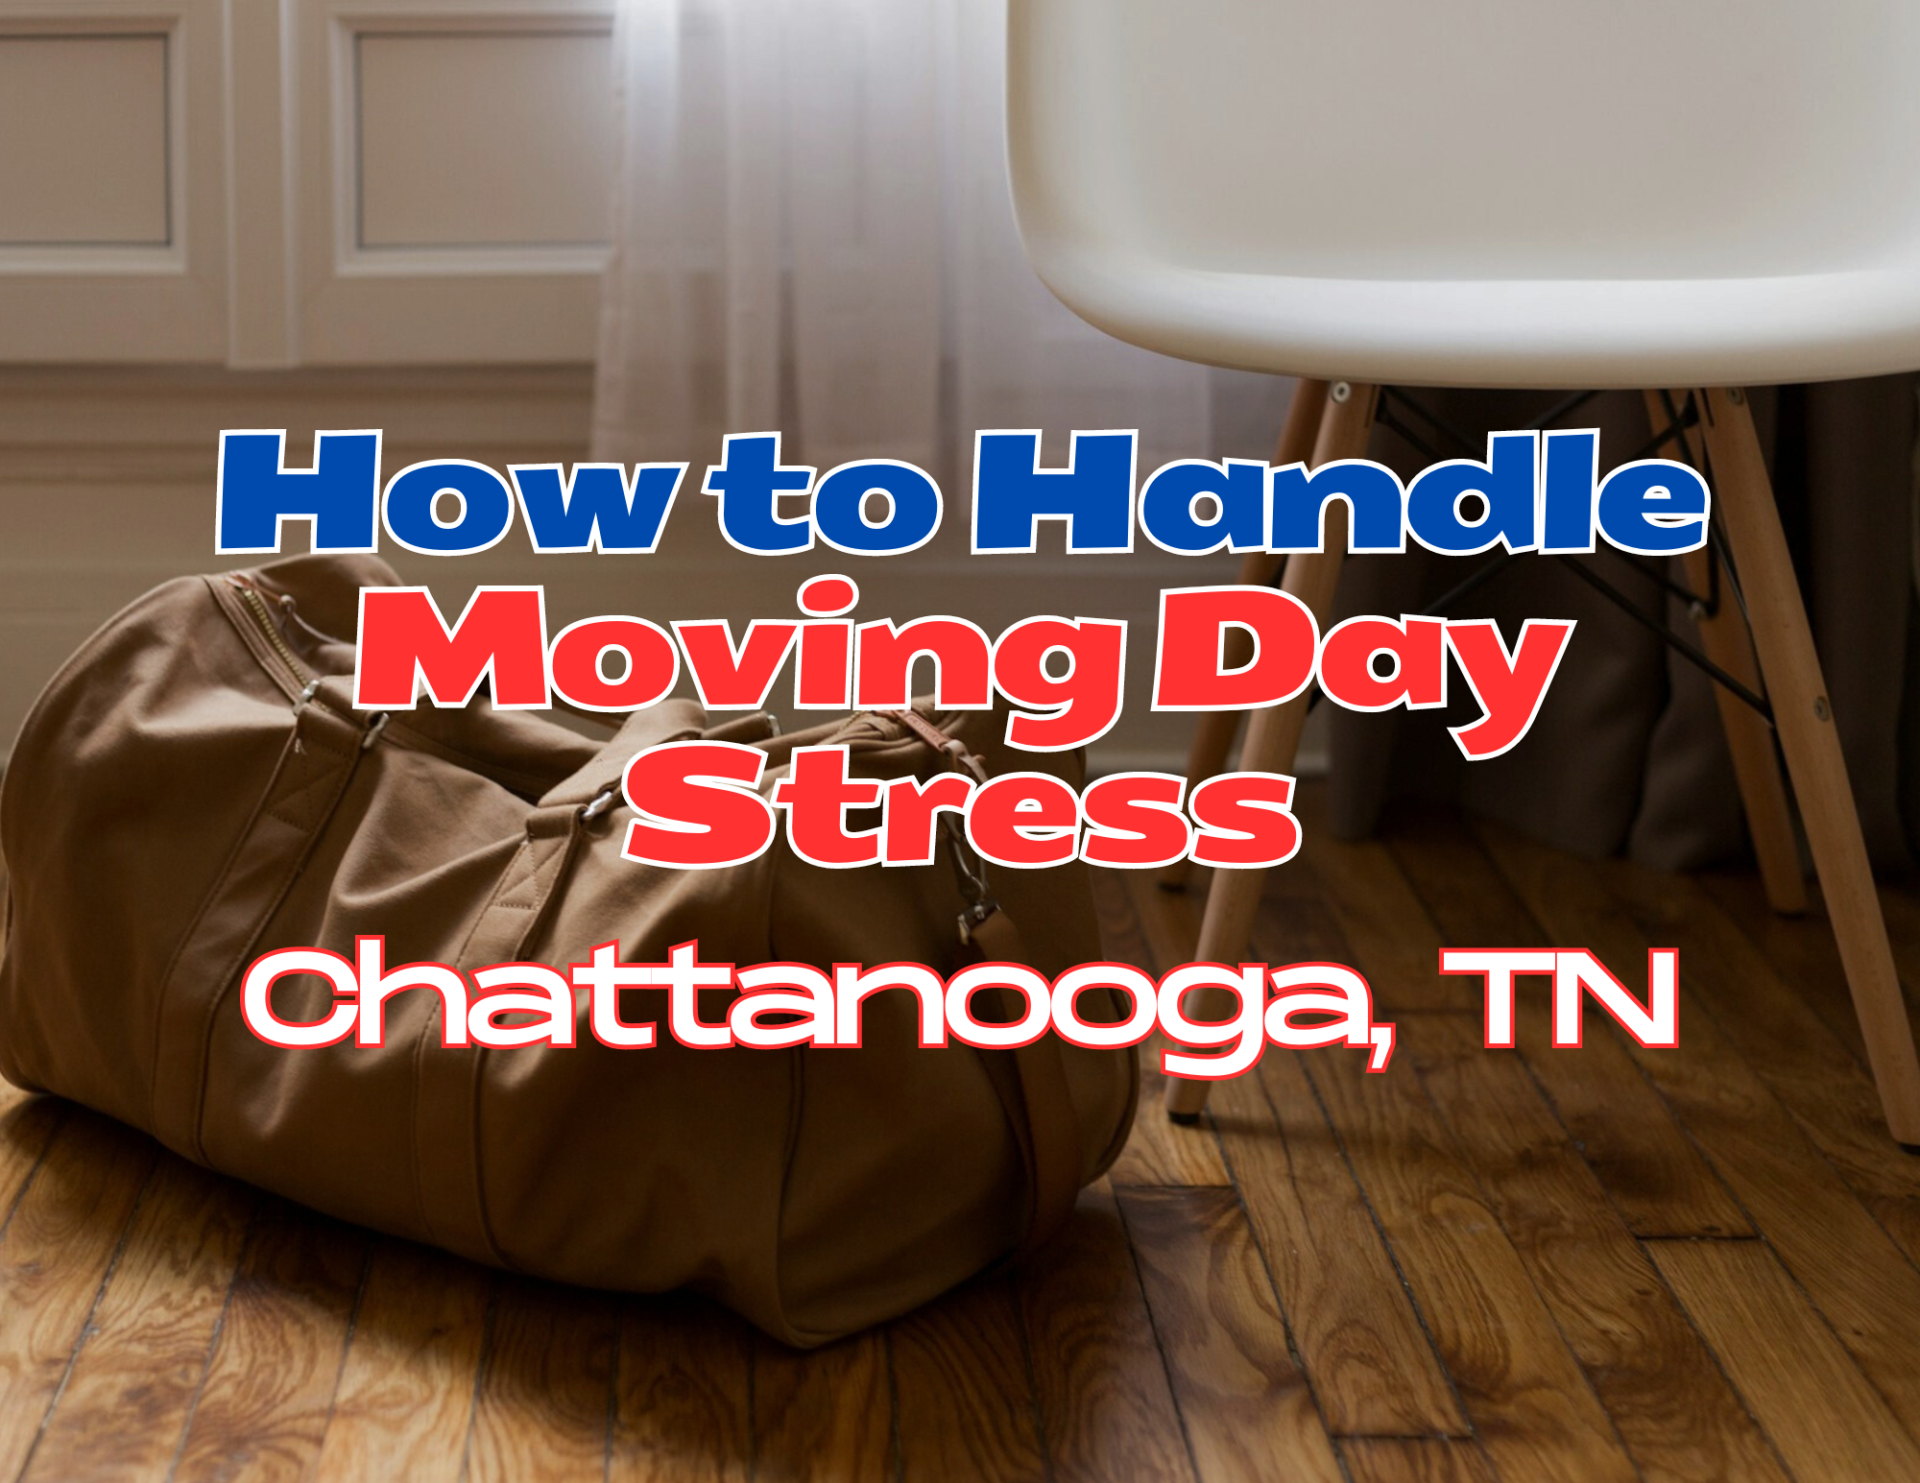 Handle Moving Day Stress How to Handle Moving Day Stress in Chattanooga?